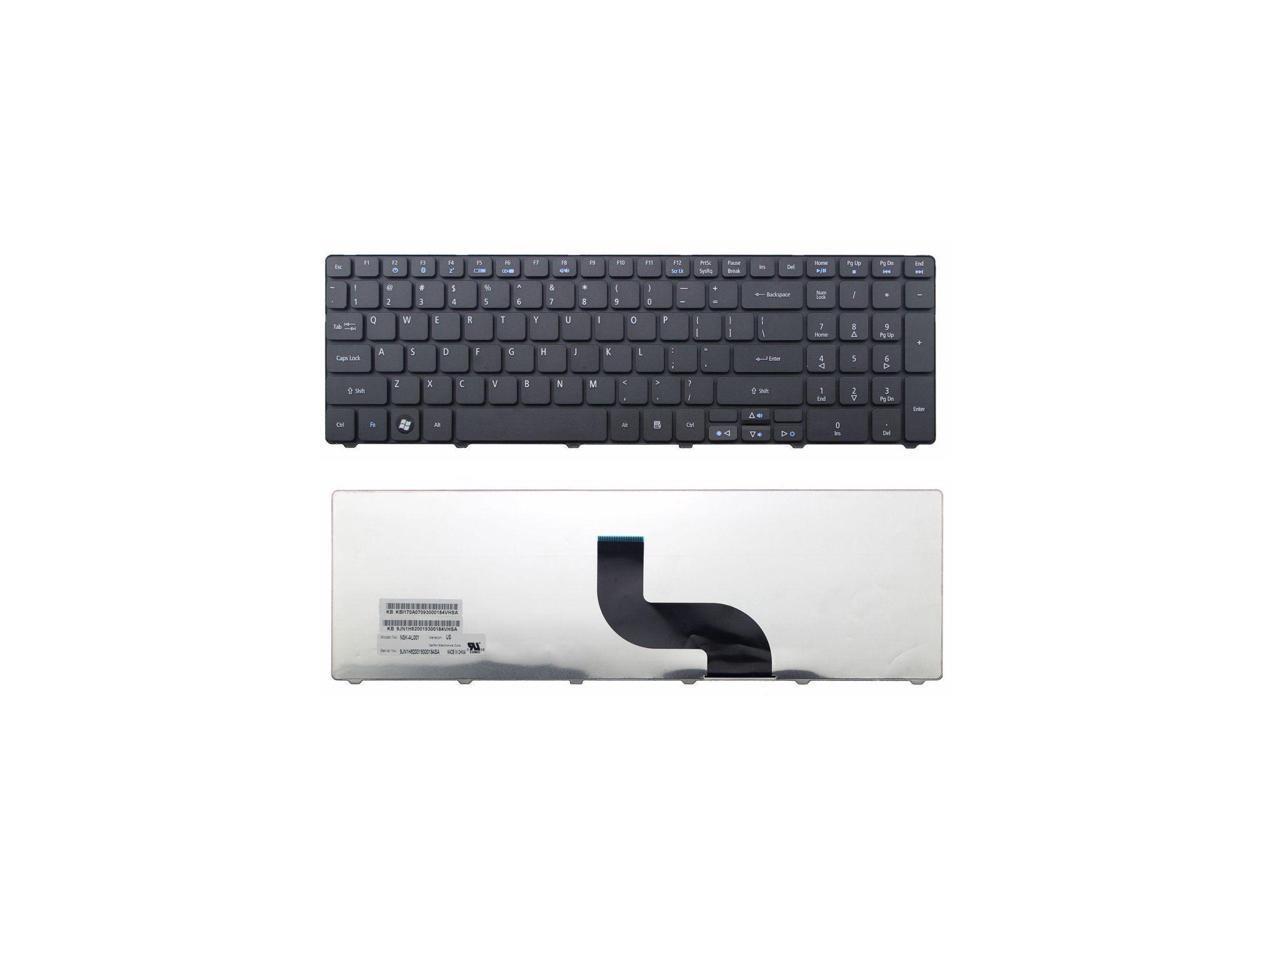 wangpeng New Laptop Keyboard for Acer Aspire 7560 7560G AS7560-SB416 AS7560-SB819 AS7560-SB600 5349 5349-2592 AEZR7R00210 V104746AS3 NSK-AL11D US Layout Black Color 